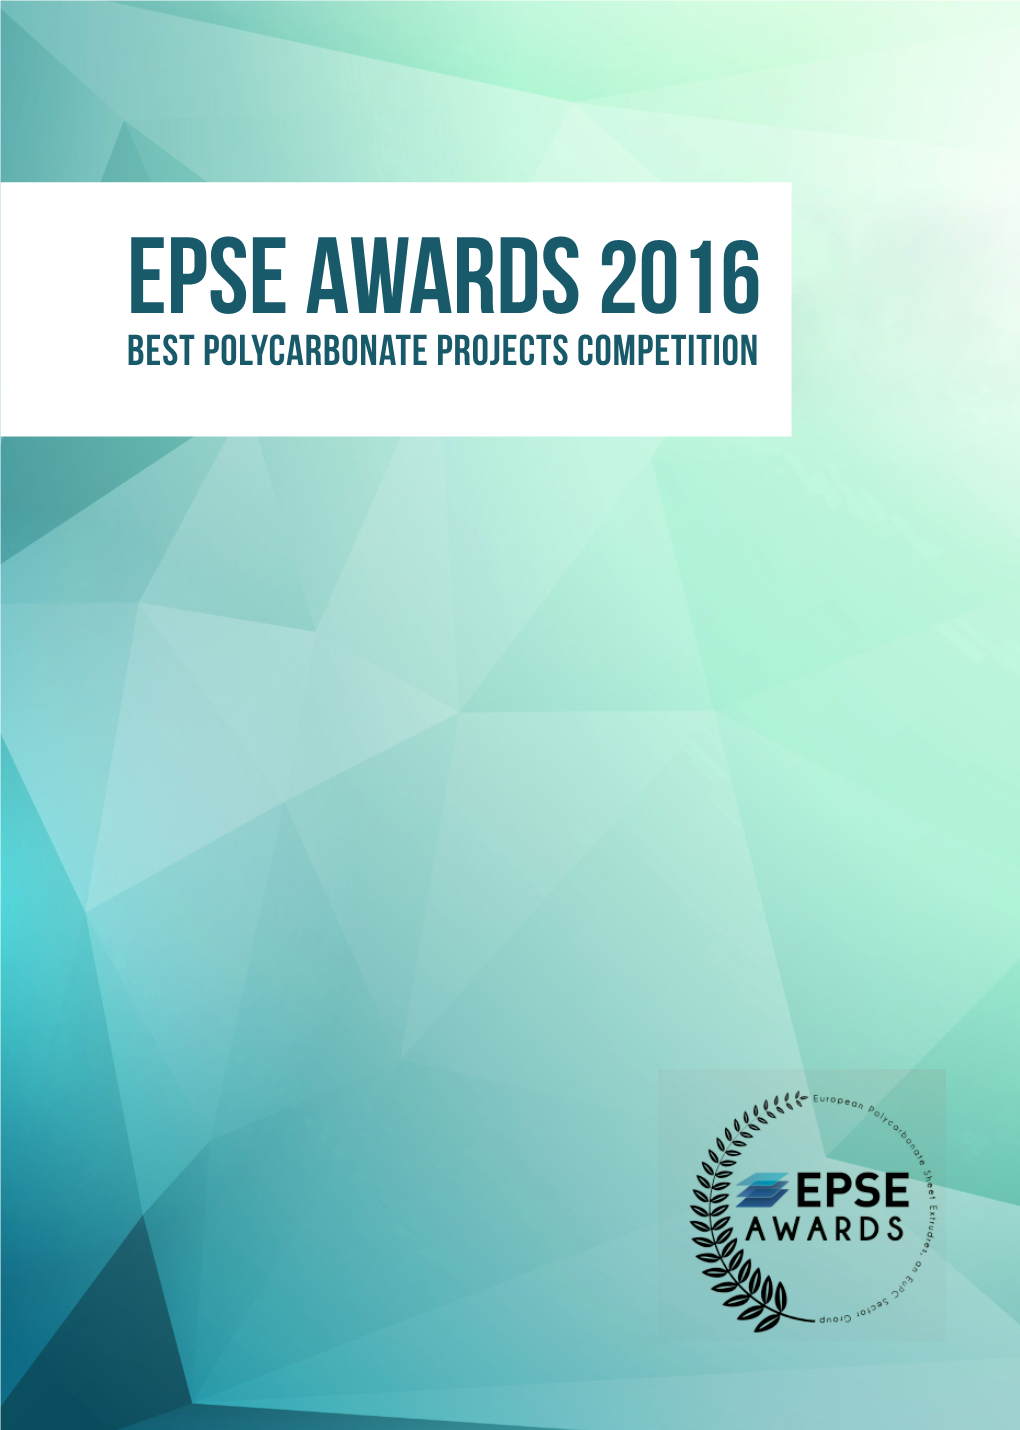 EPSE AWARDS 2016 Best Polycarbonate Projects Competition ABOUT the BEST POLYCARBONATE PROJECTS COMPETITION